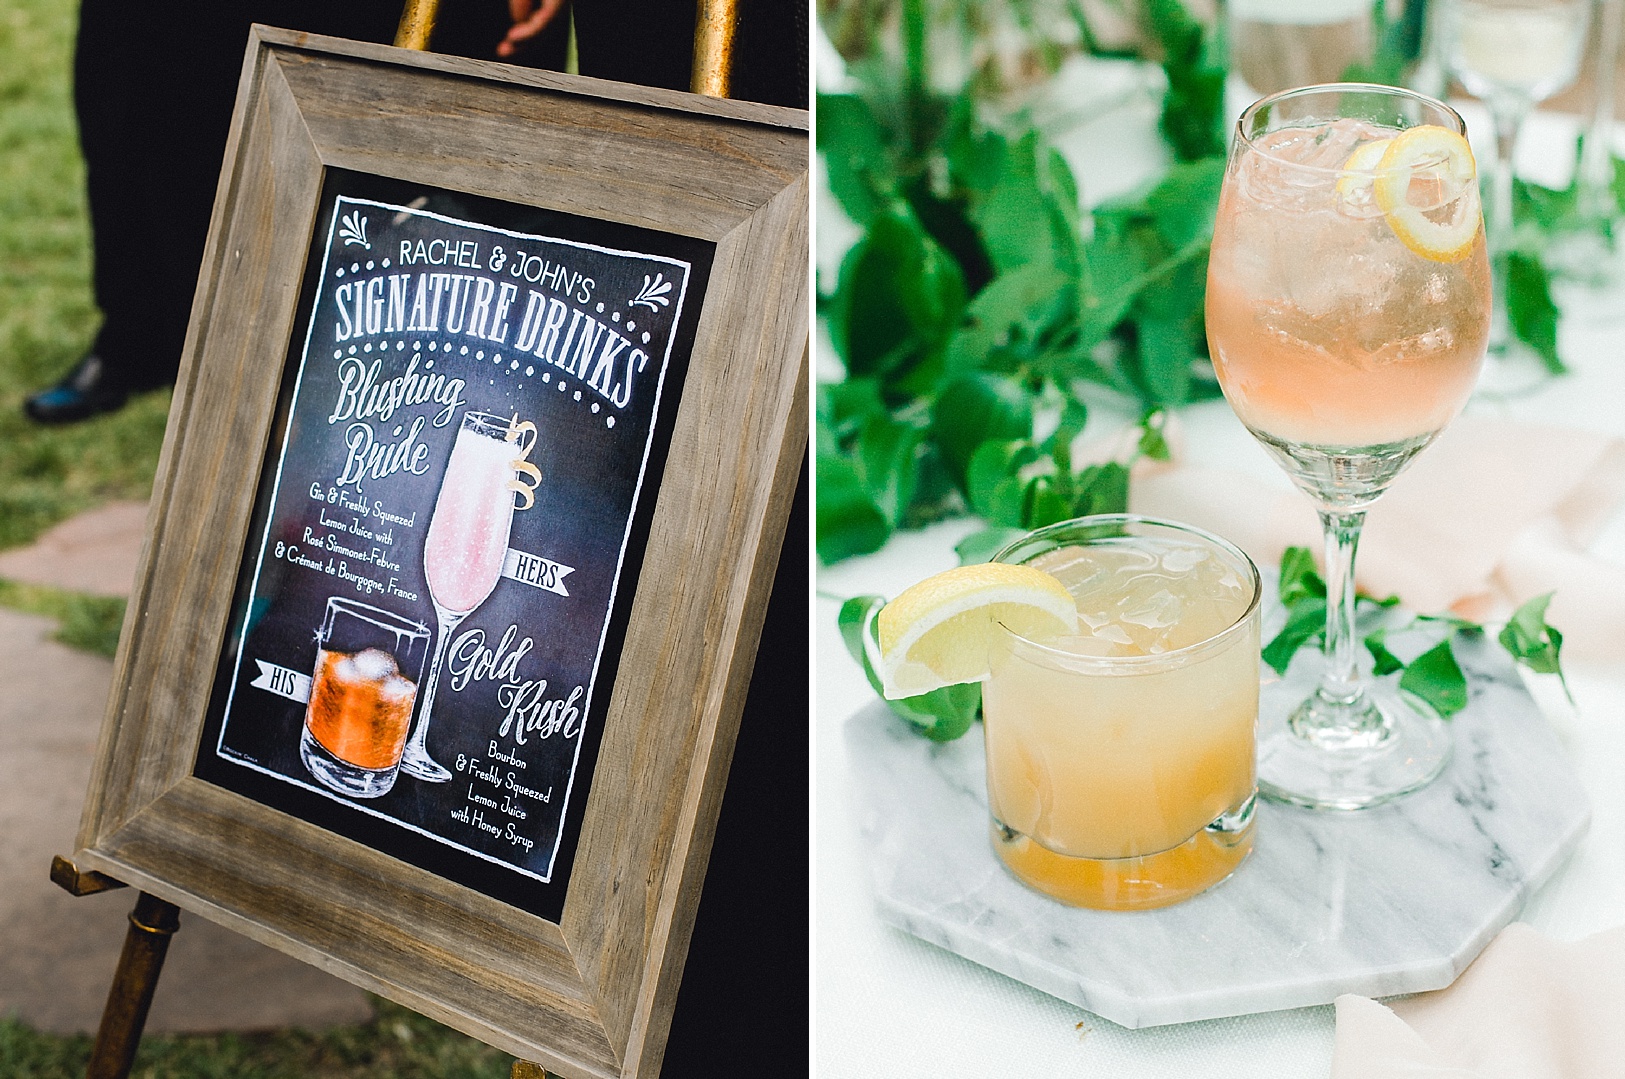 Custom cocktail sign with calligraphy and sketches for whiskey and gin drinks